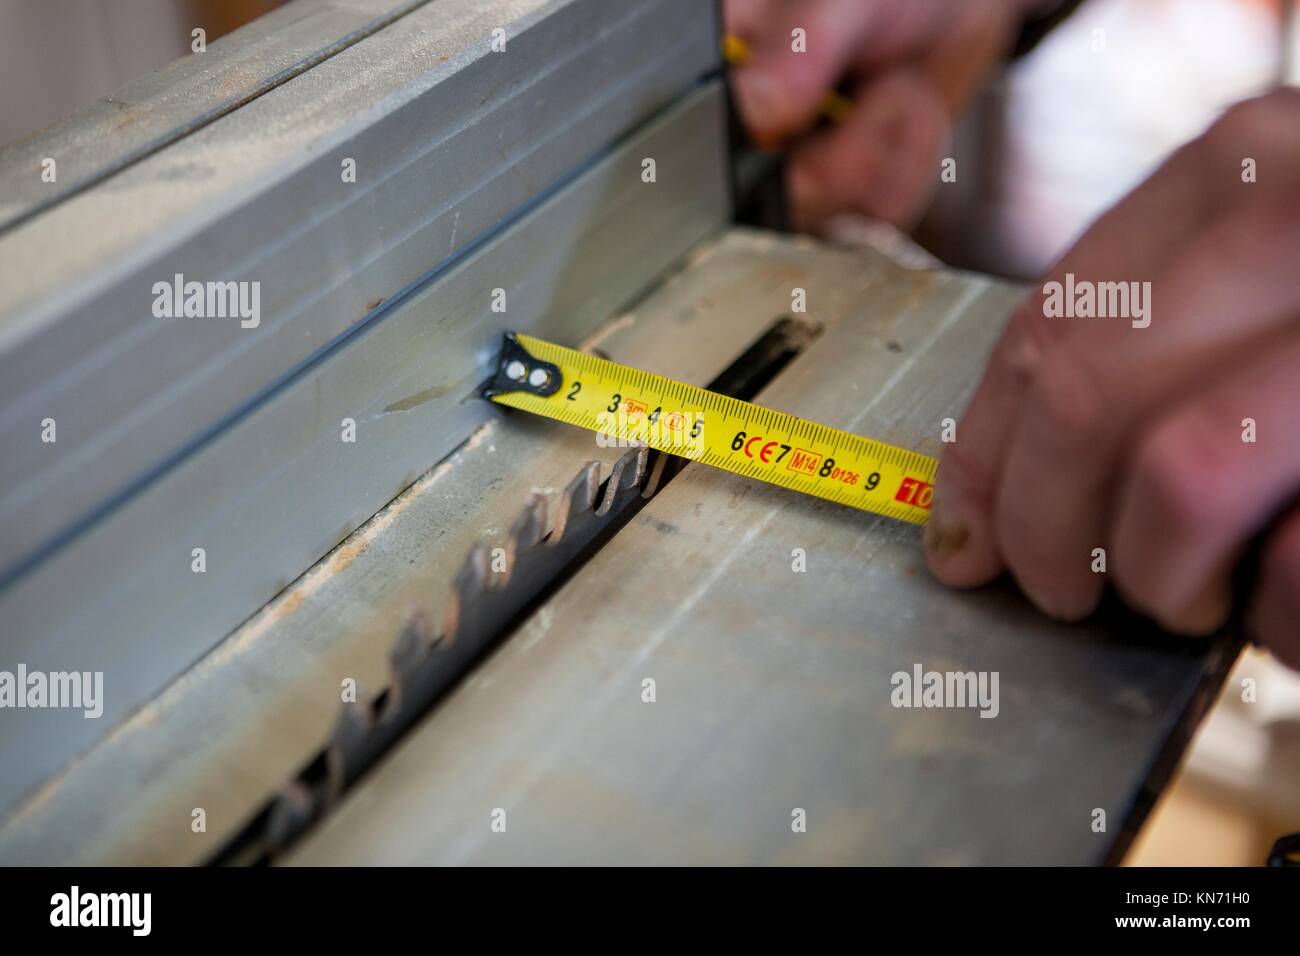 Carpenter working with doorjambs using electric circular saw. He is measuring the cutting area. Stock Photo